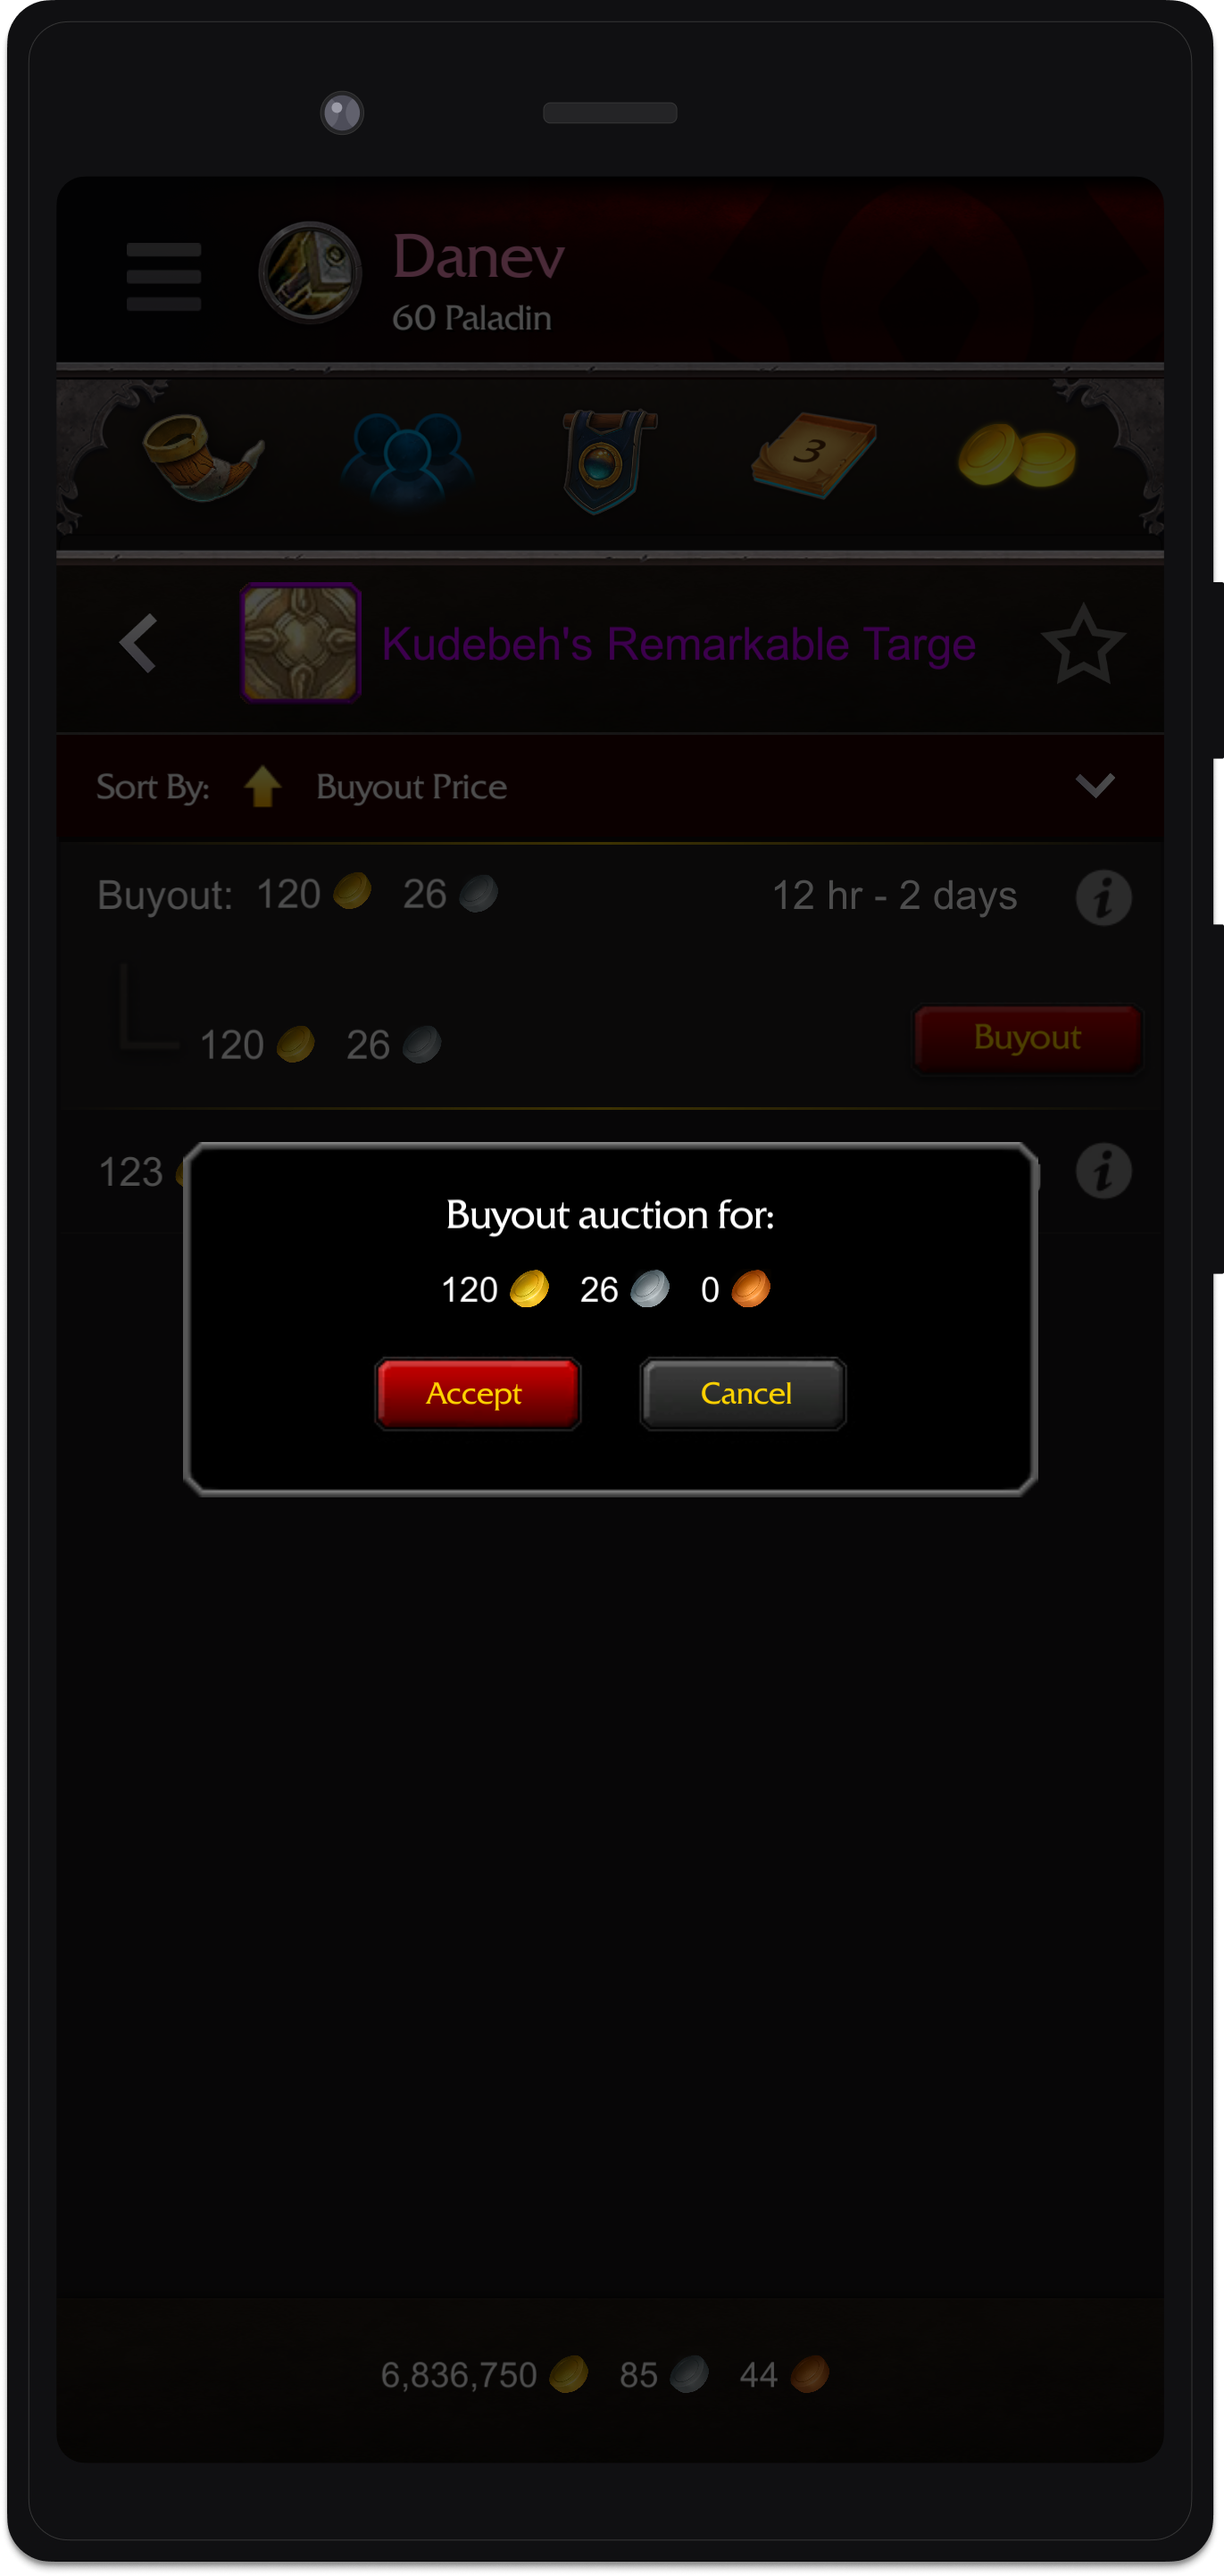 Auction house interface for buying auction.